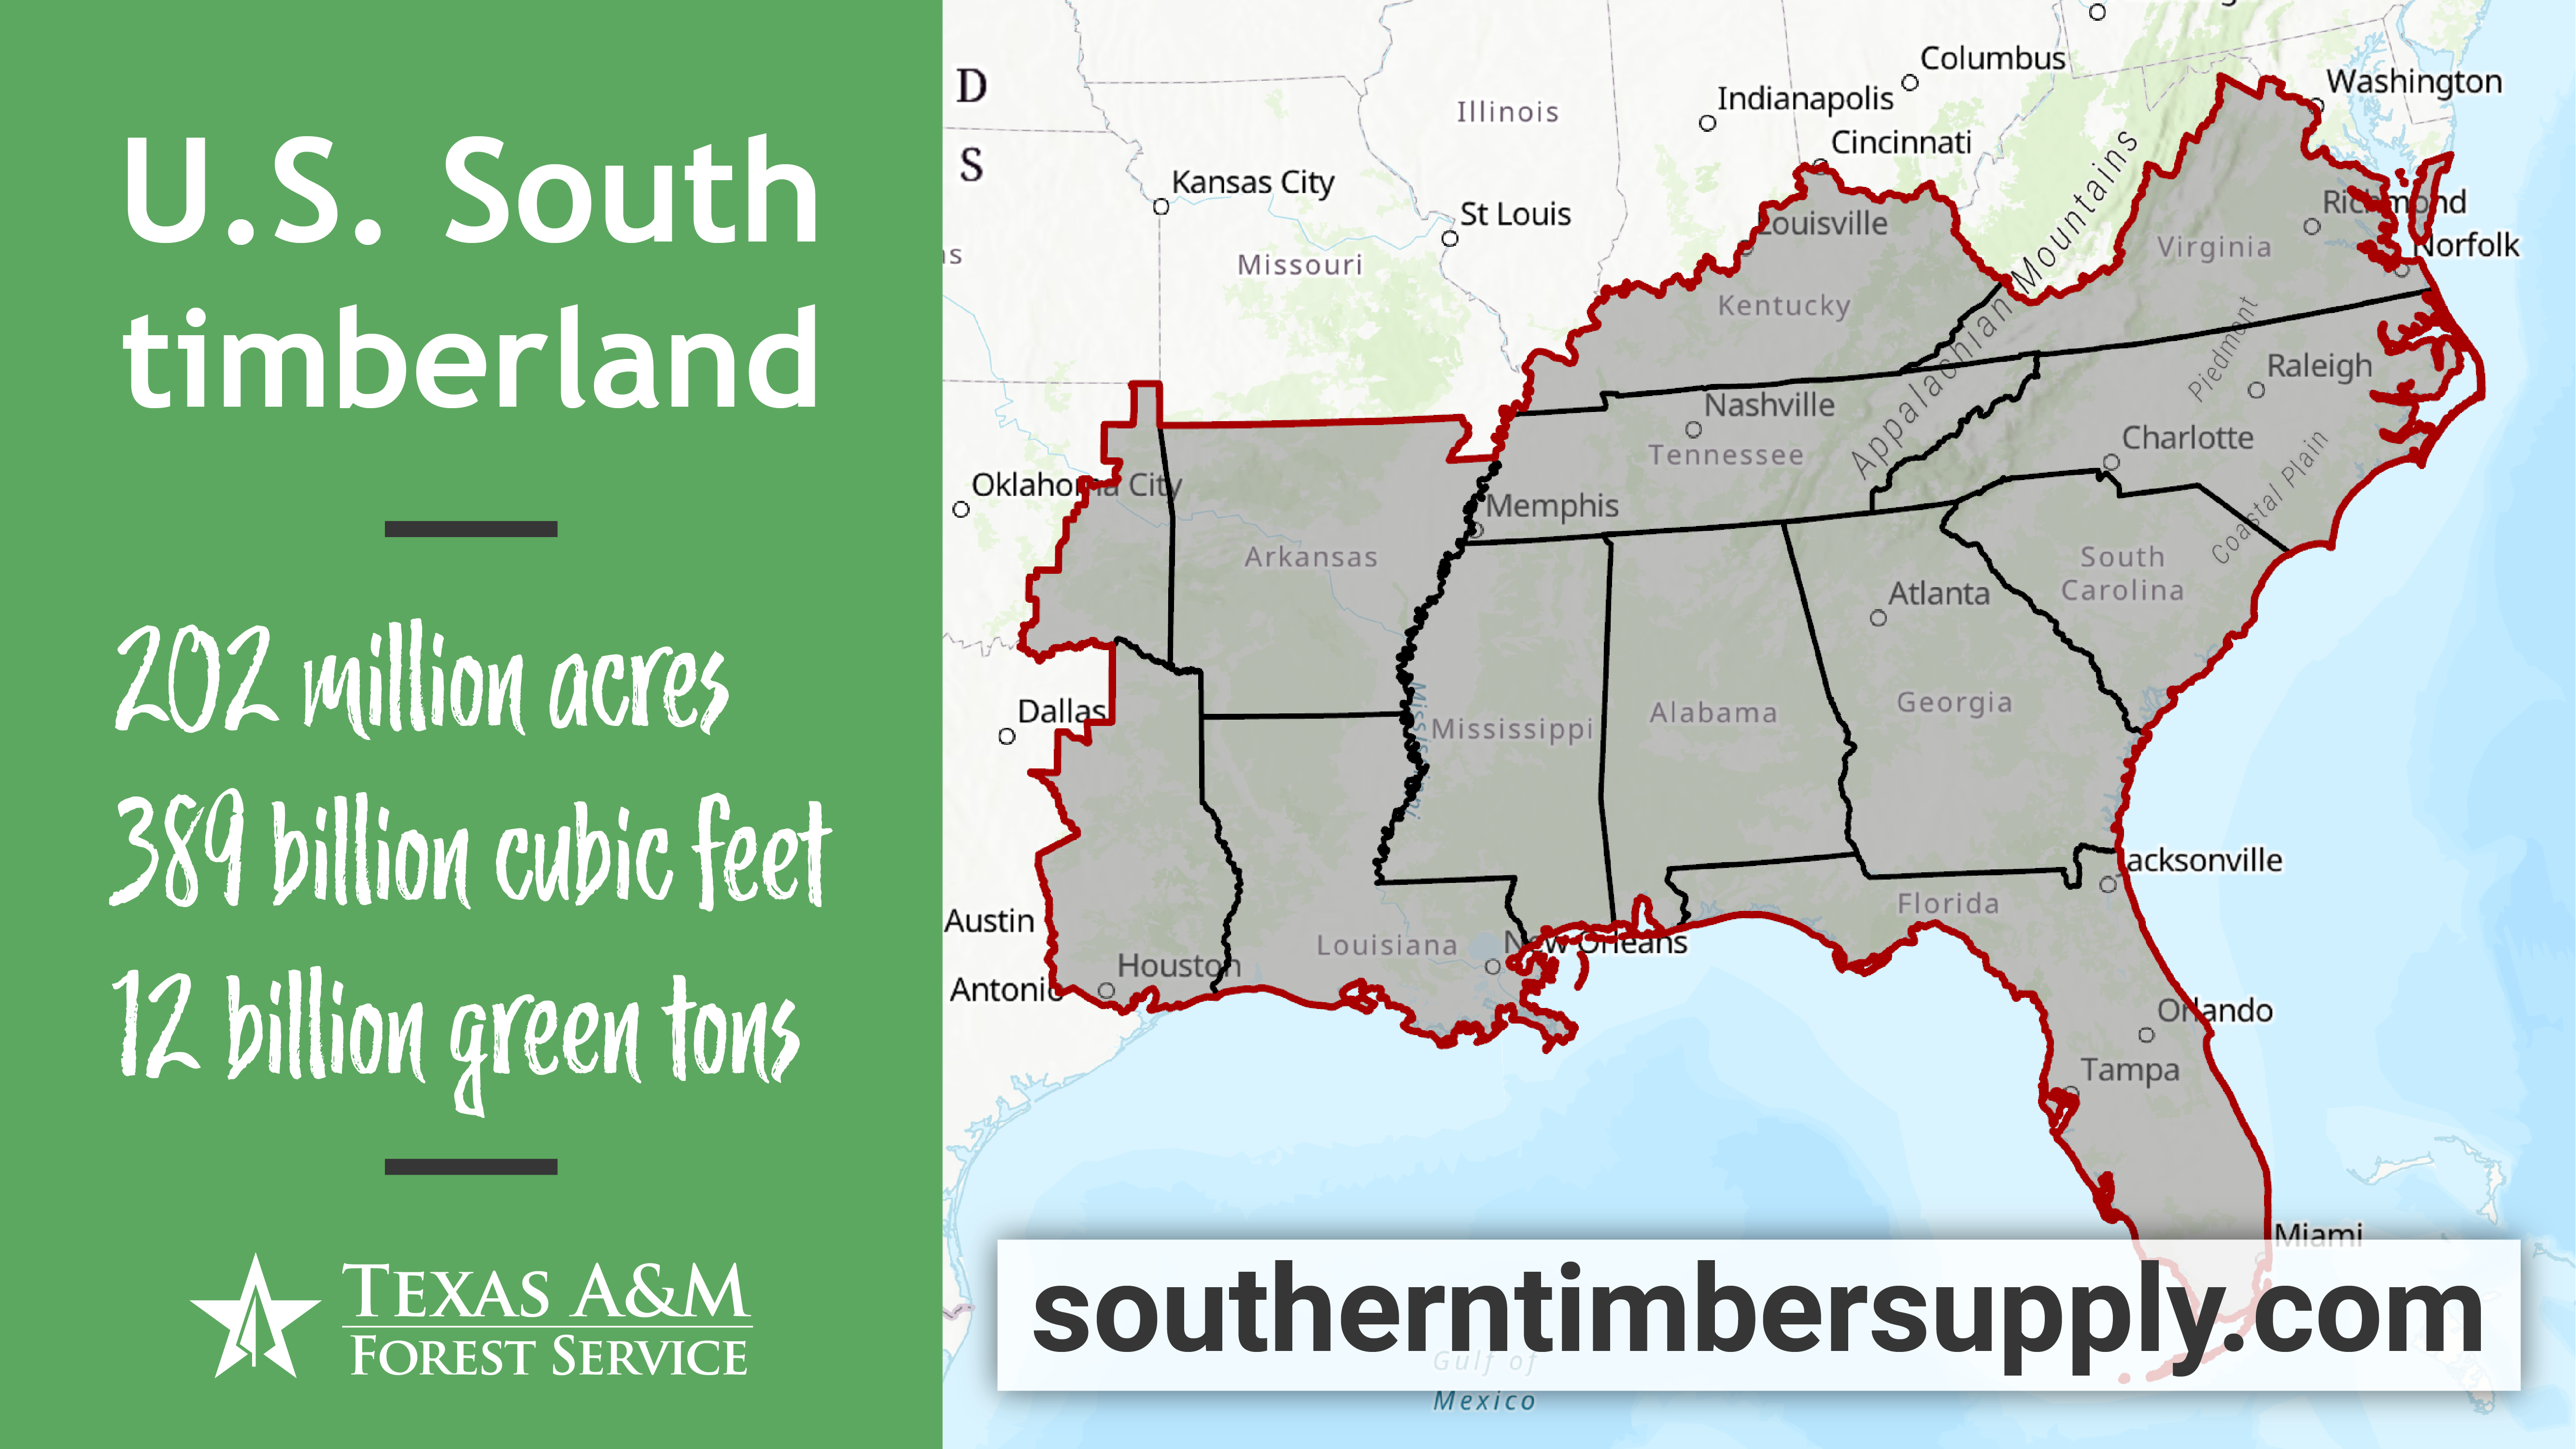 Timber Supply Analysis for the South